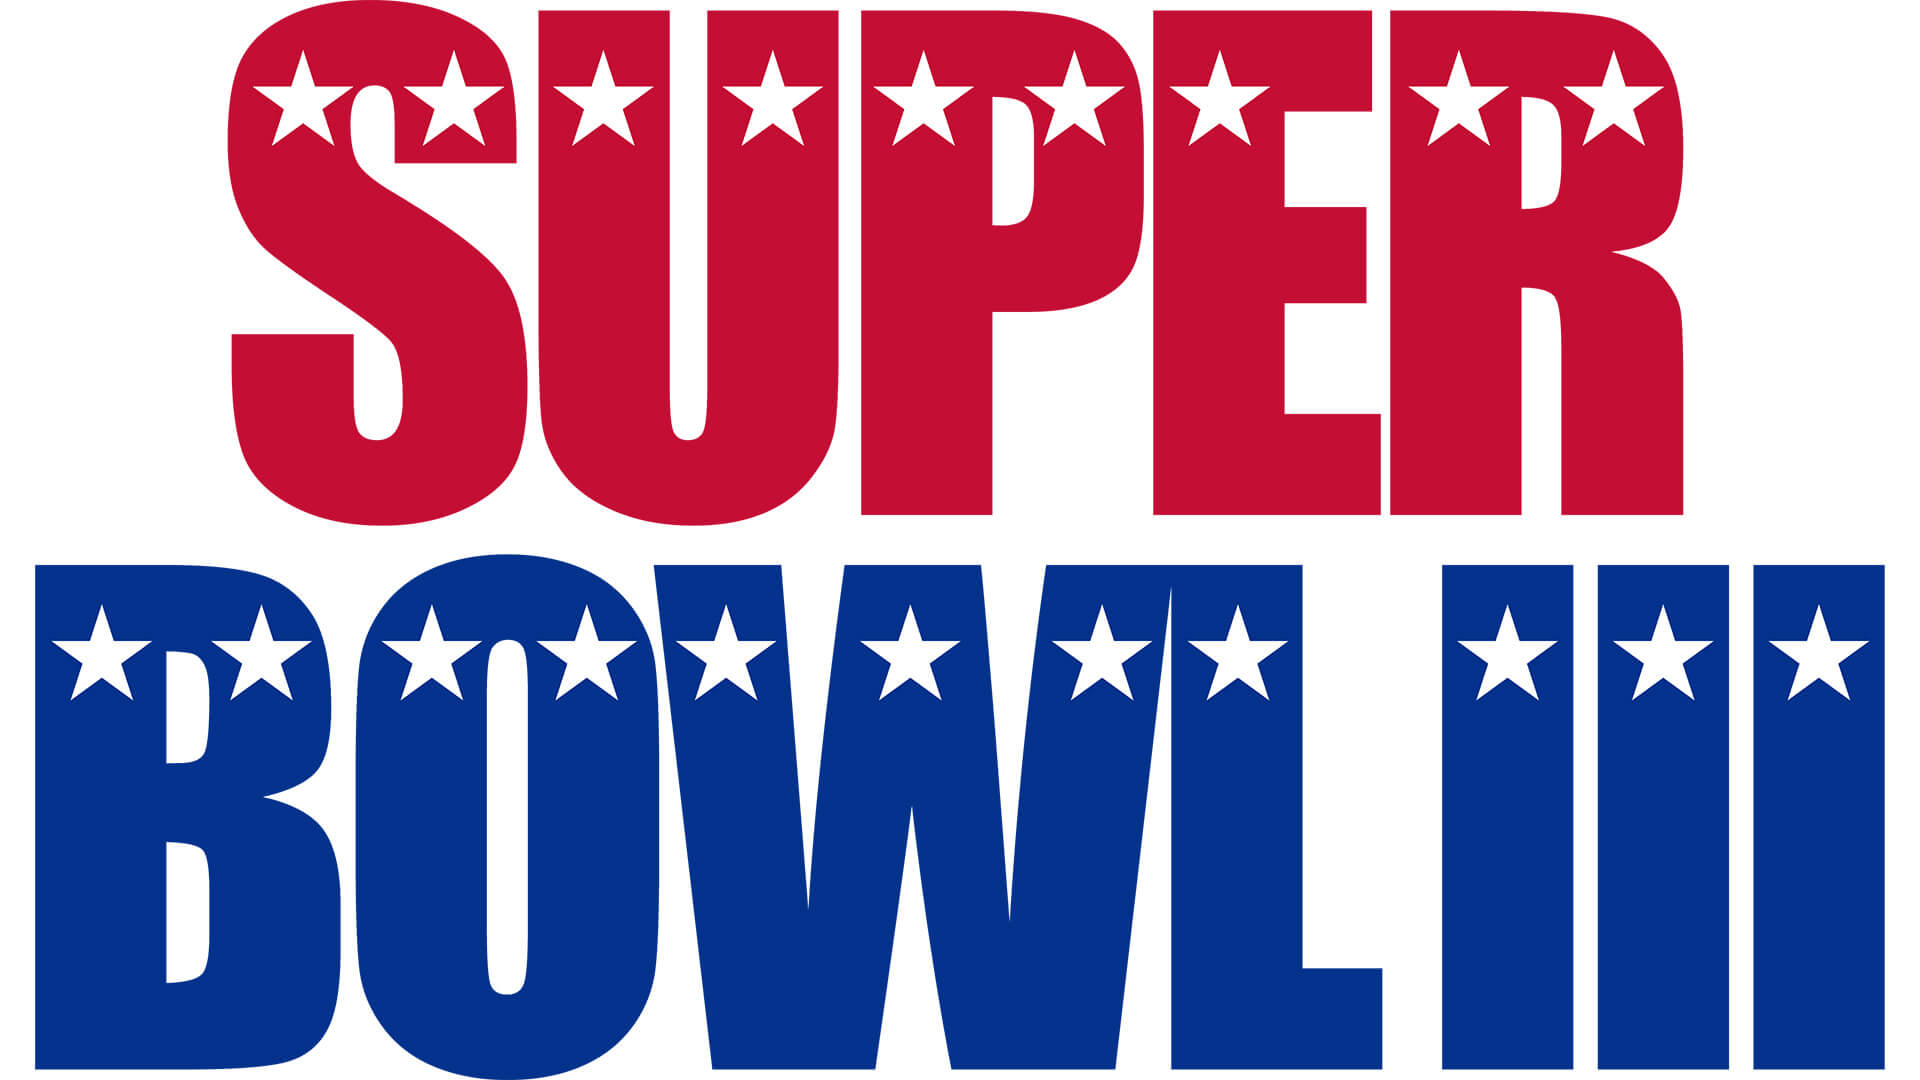 The Super Bowl LVIII logo is its most original design in years